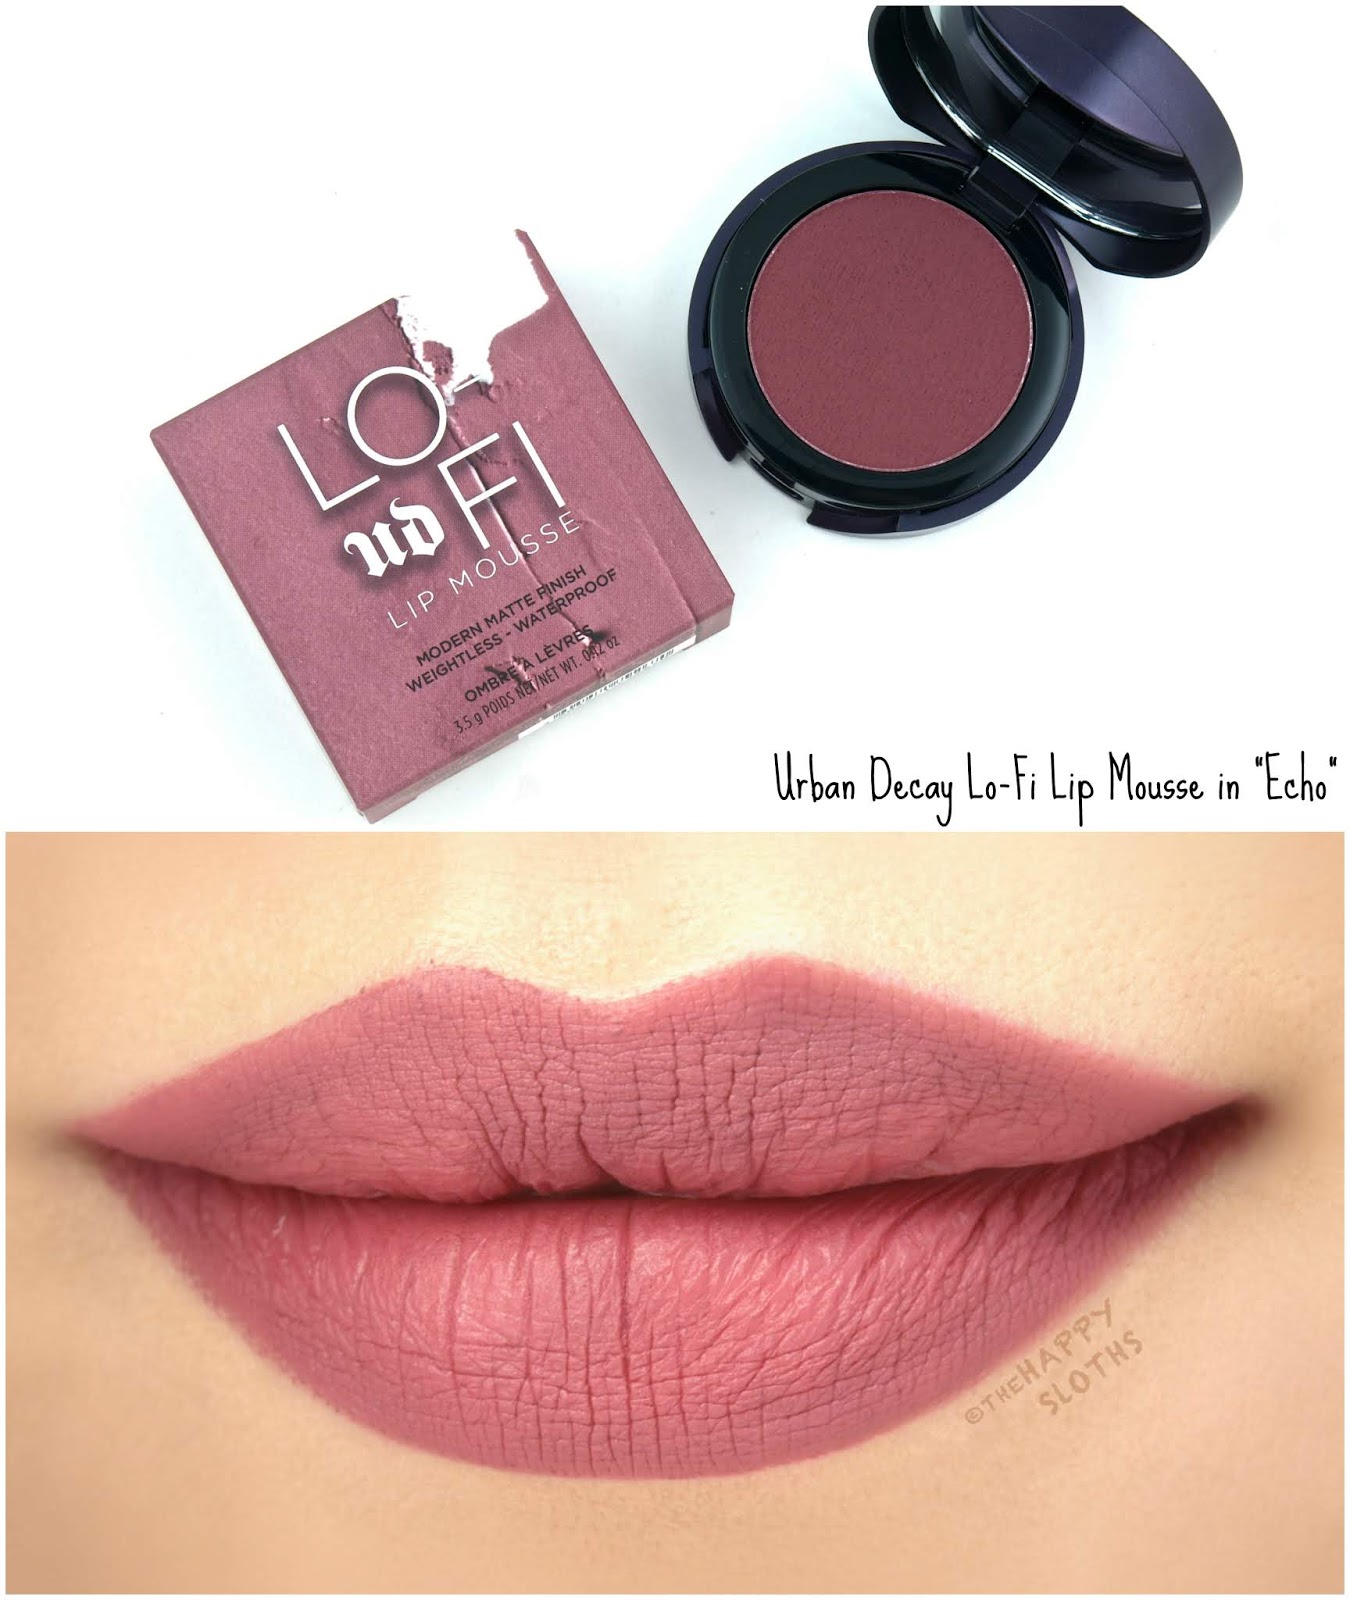 Urban Decay | Lo-Fi Lip Mousse in "Echo": Review and Swatches